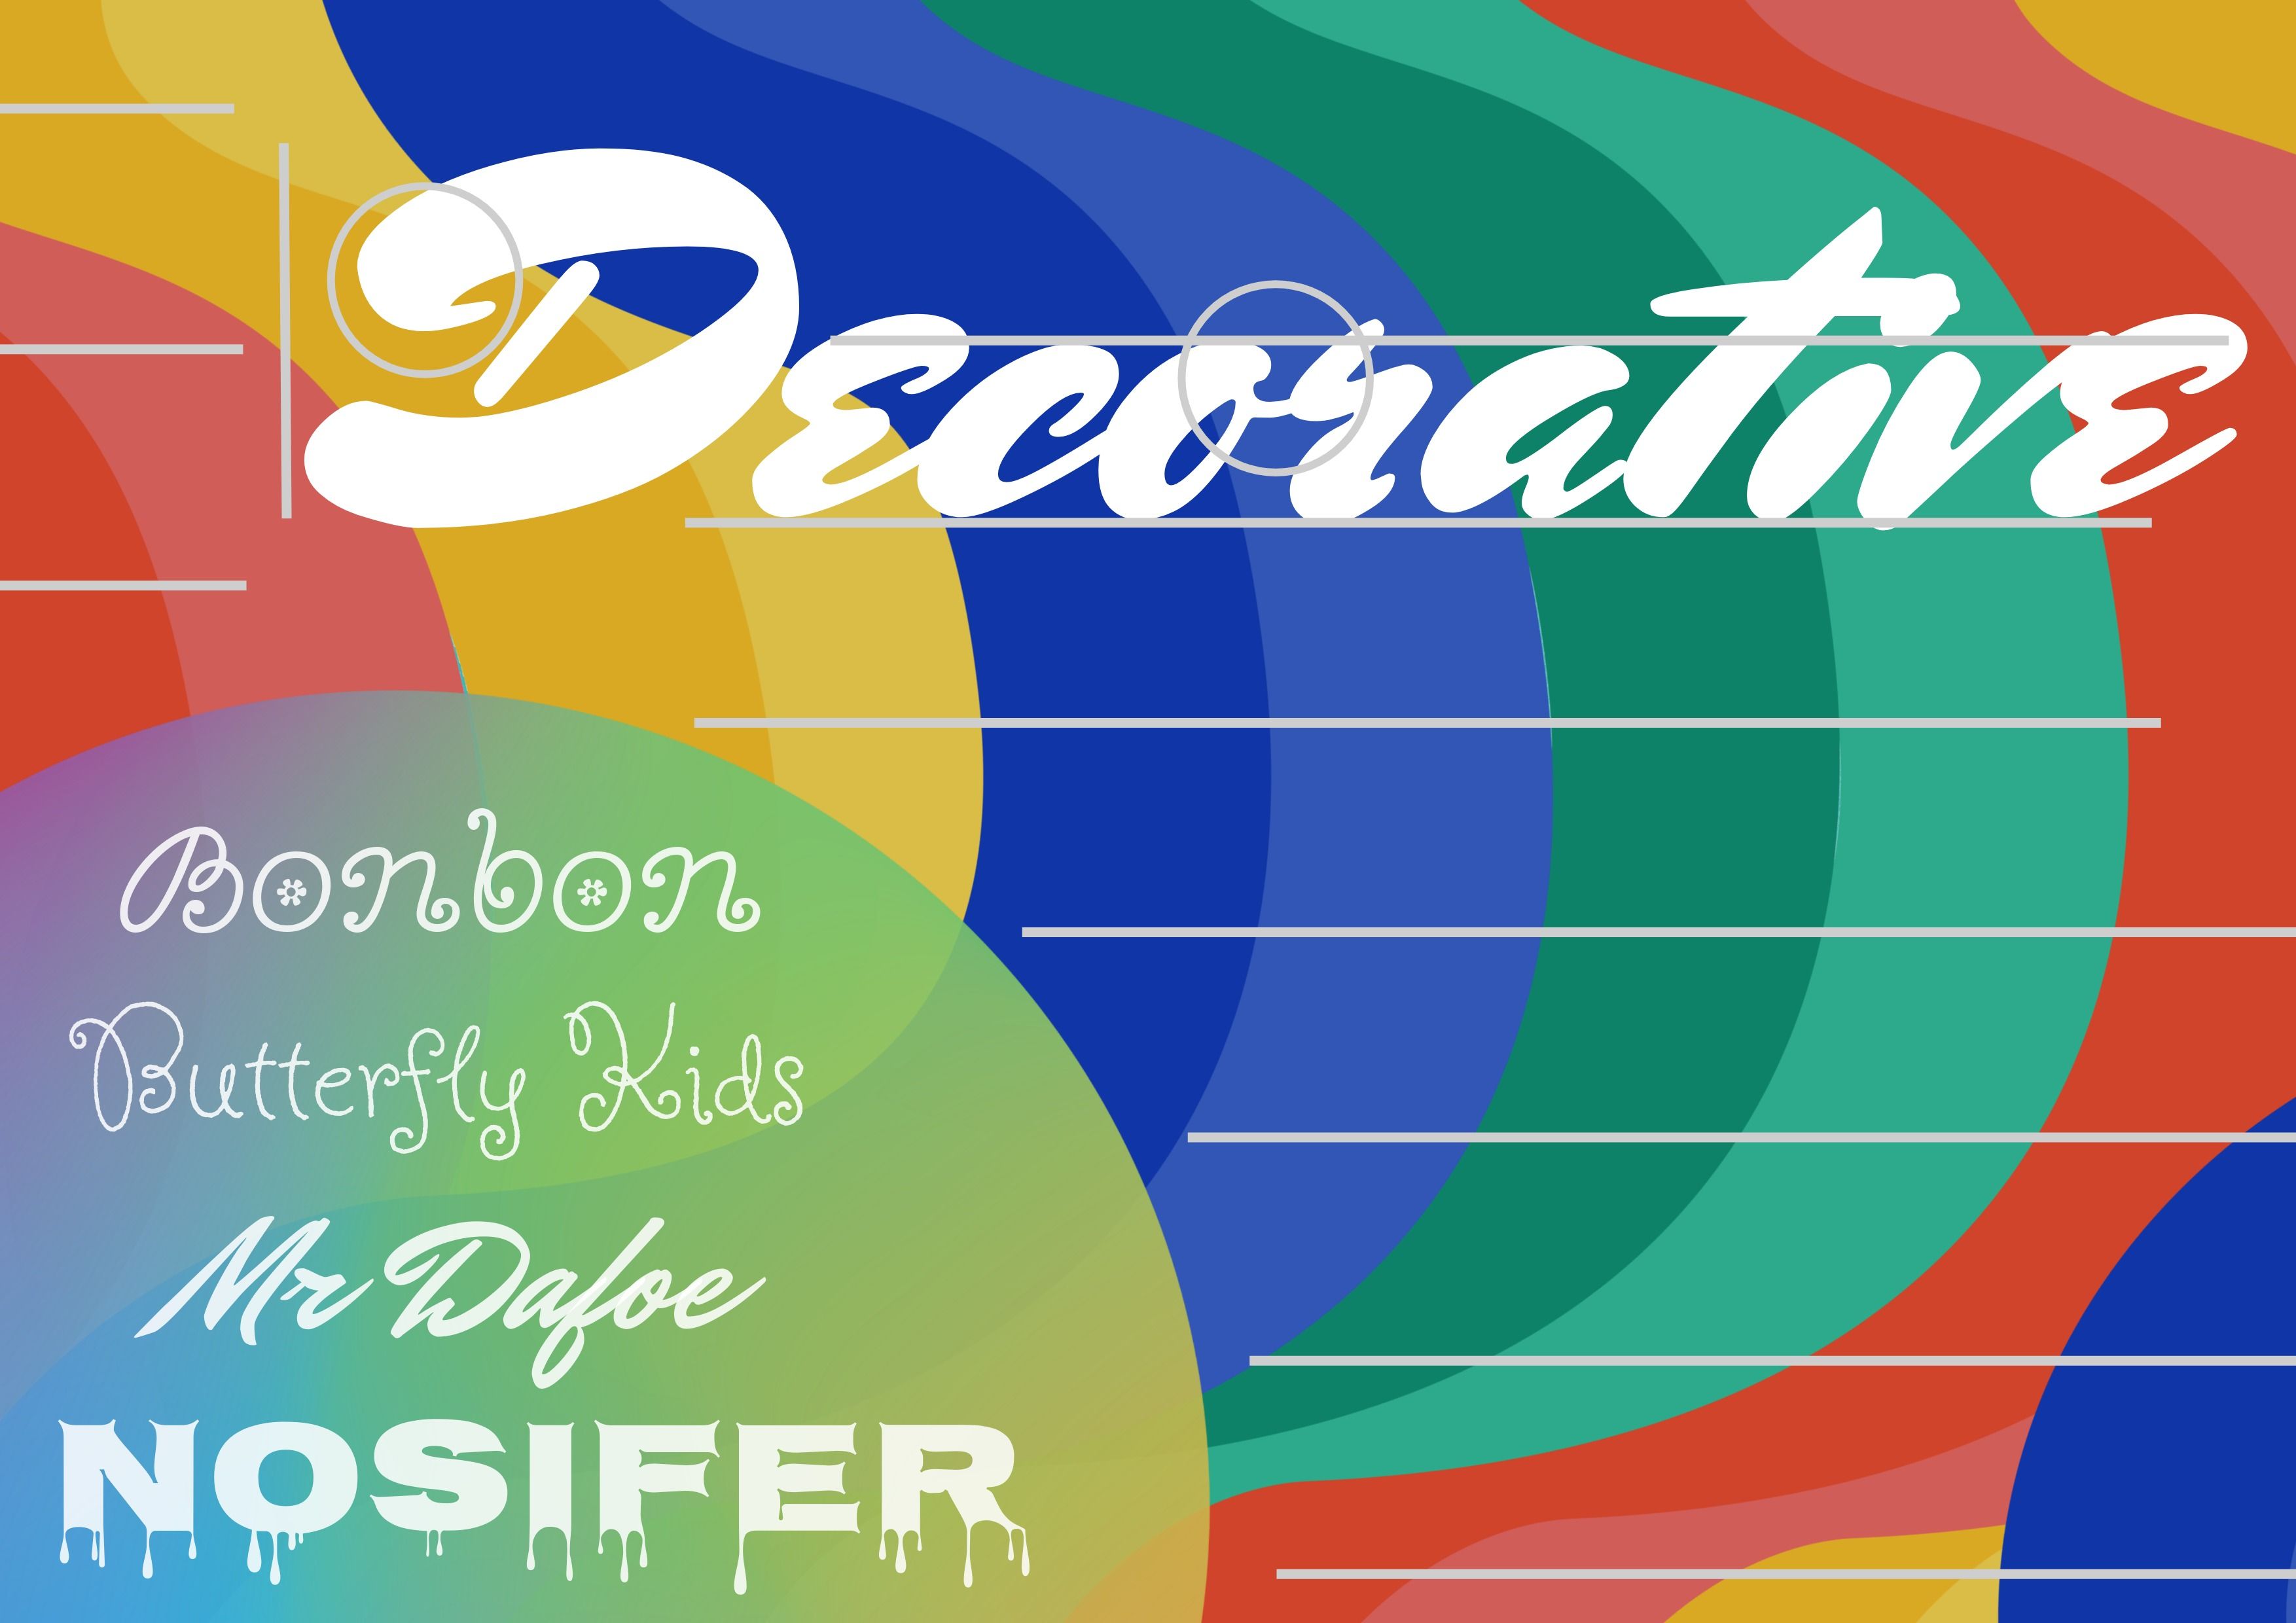 Colorful Decorative Font Type Template with 4 examples in white - The complete guide to fonts: 5 essential types of fonts in typography - Image